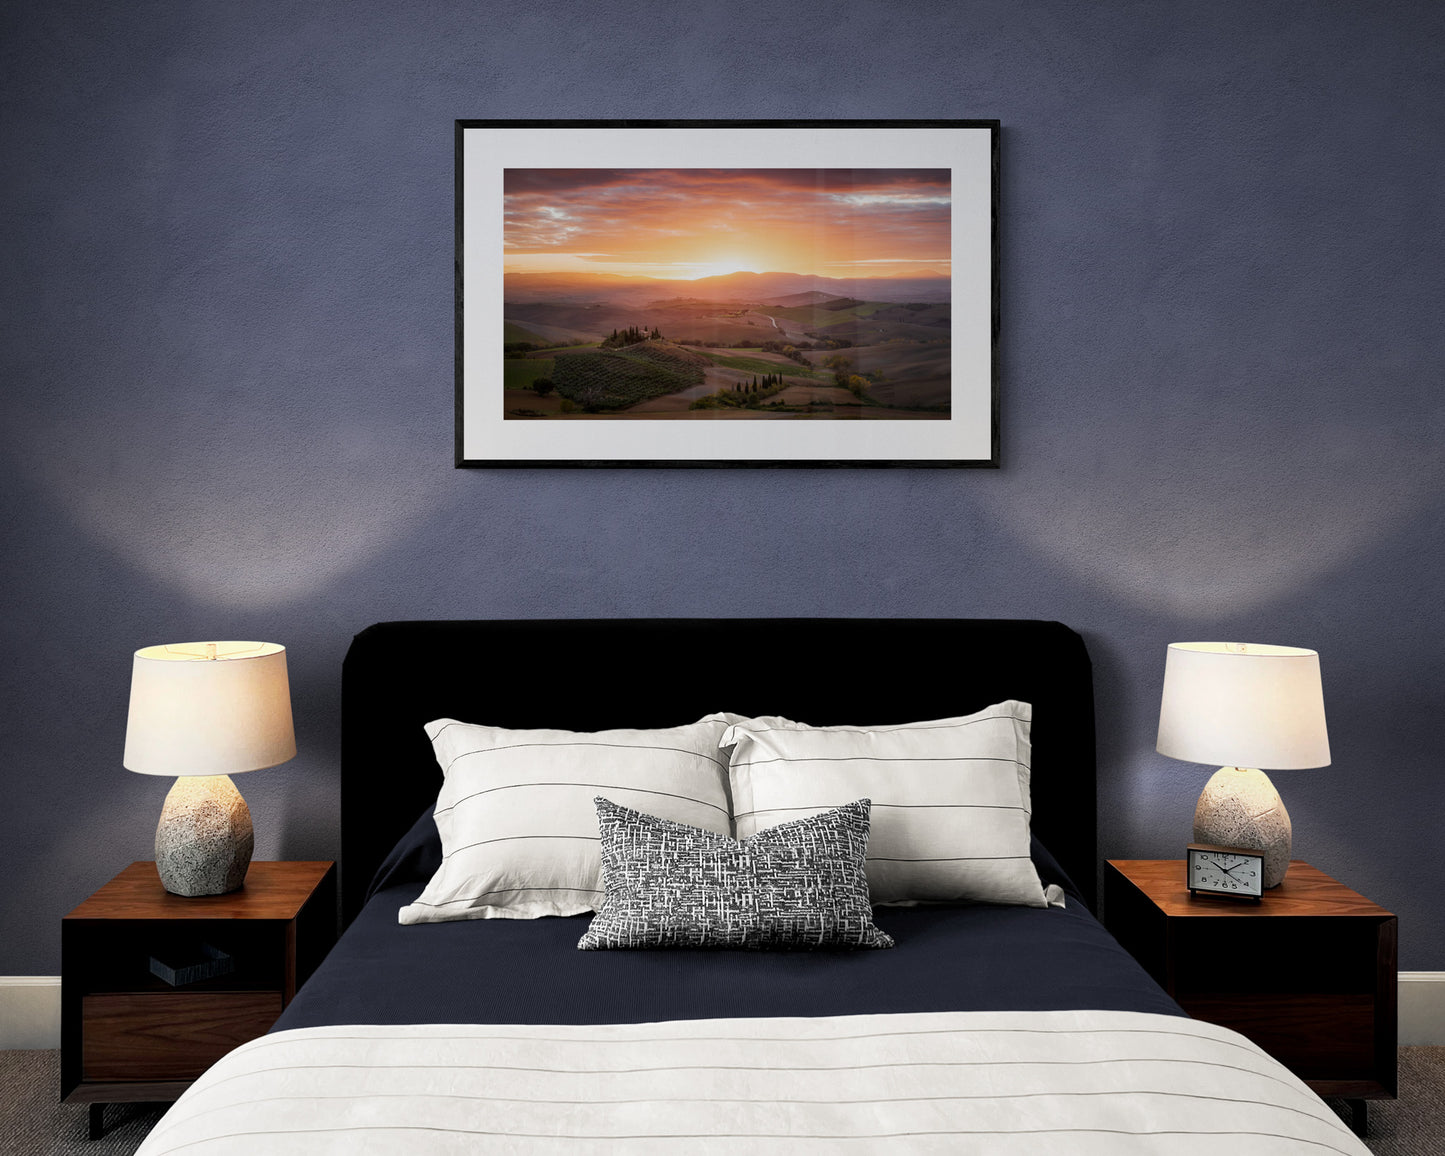 Image Title: Morning Glory Photographer: Marcus Danz Location: Val D'orcia, Italy Image description: The rolling hills of Tuscany and Podere Belvedere are caressed by the soft light of the morning sky. High quality Fine Art print up to 36 inch / around 90 centimeters on Hahnemühle paper available. Large variant in bedroom.